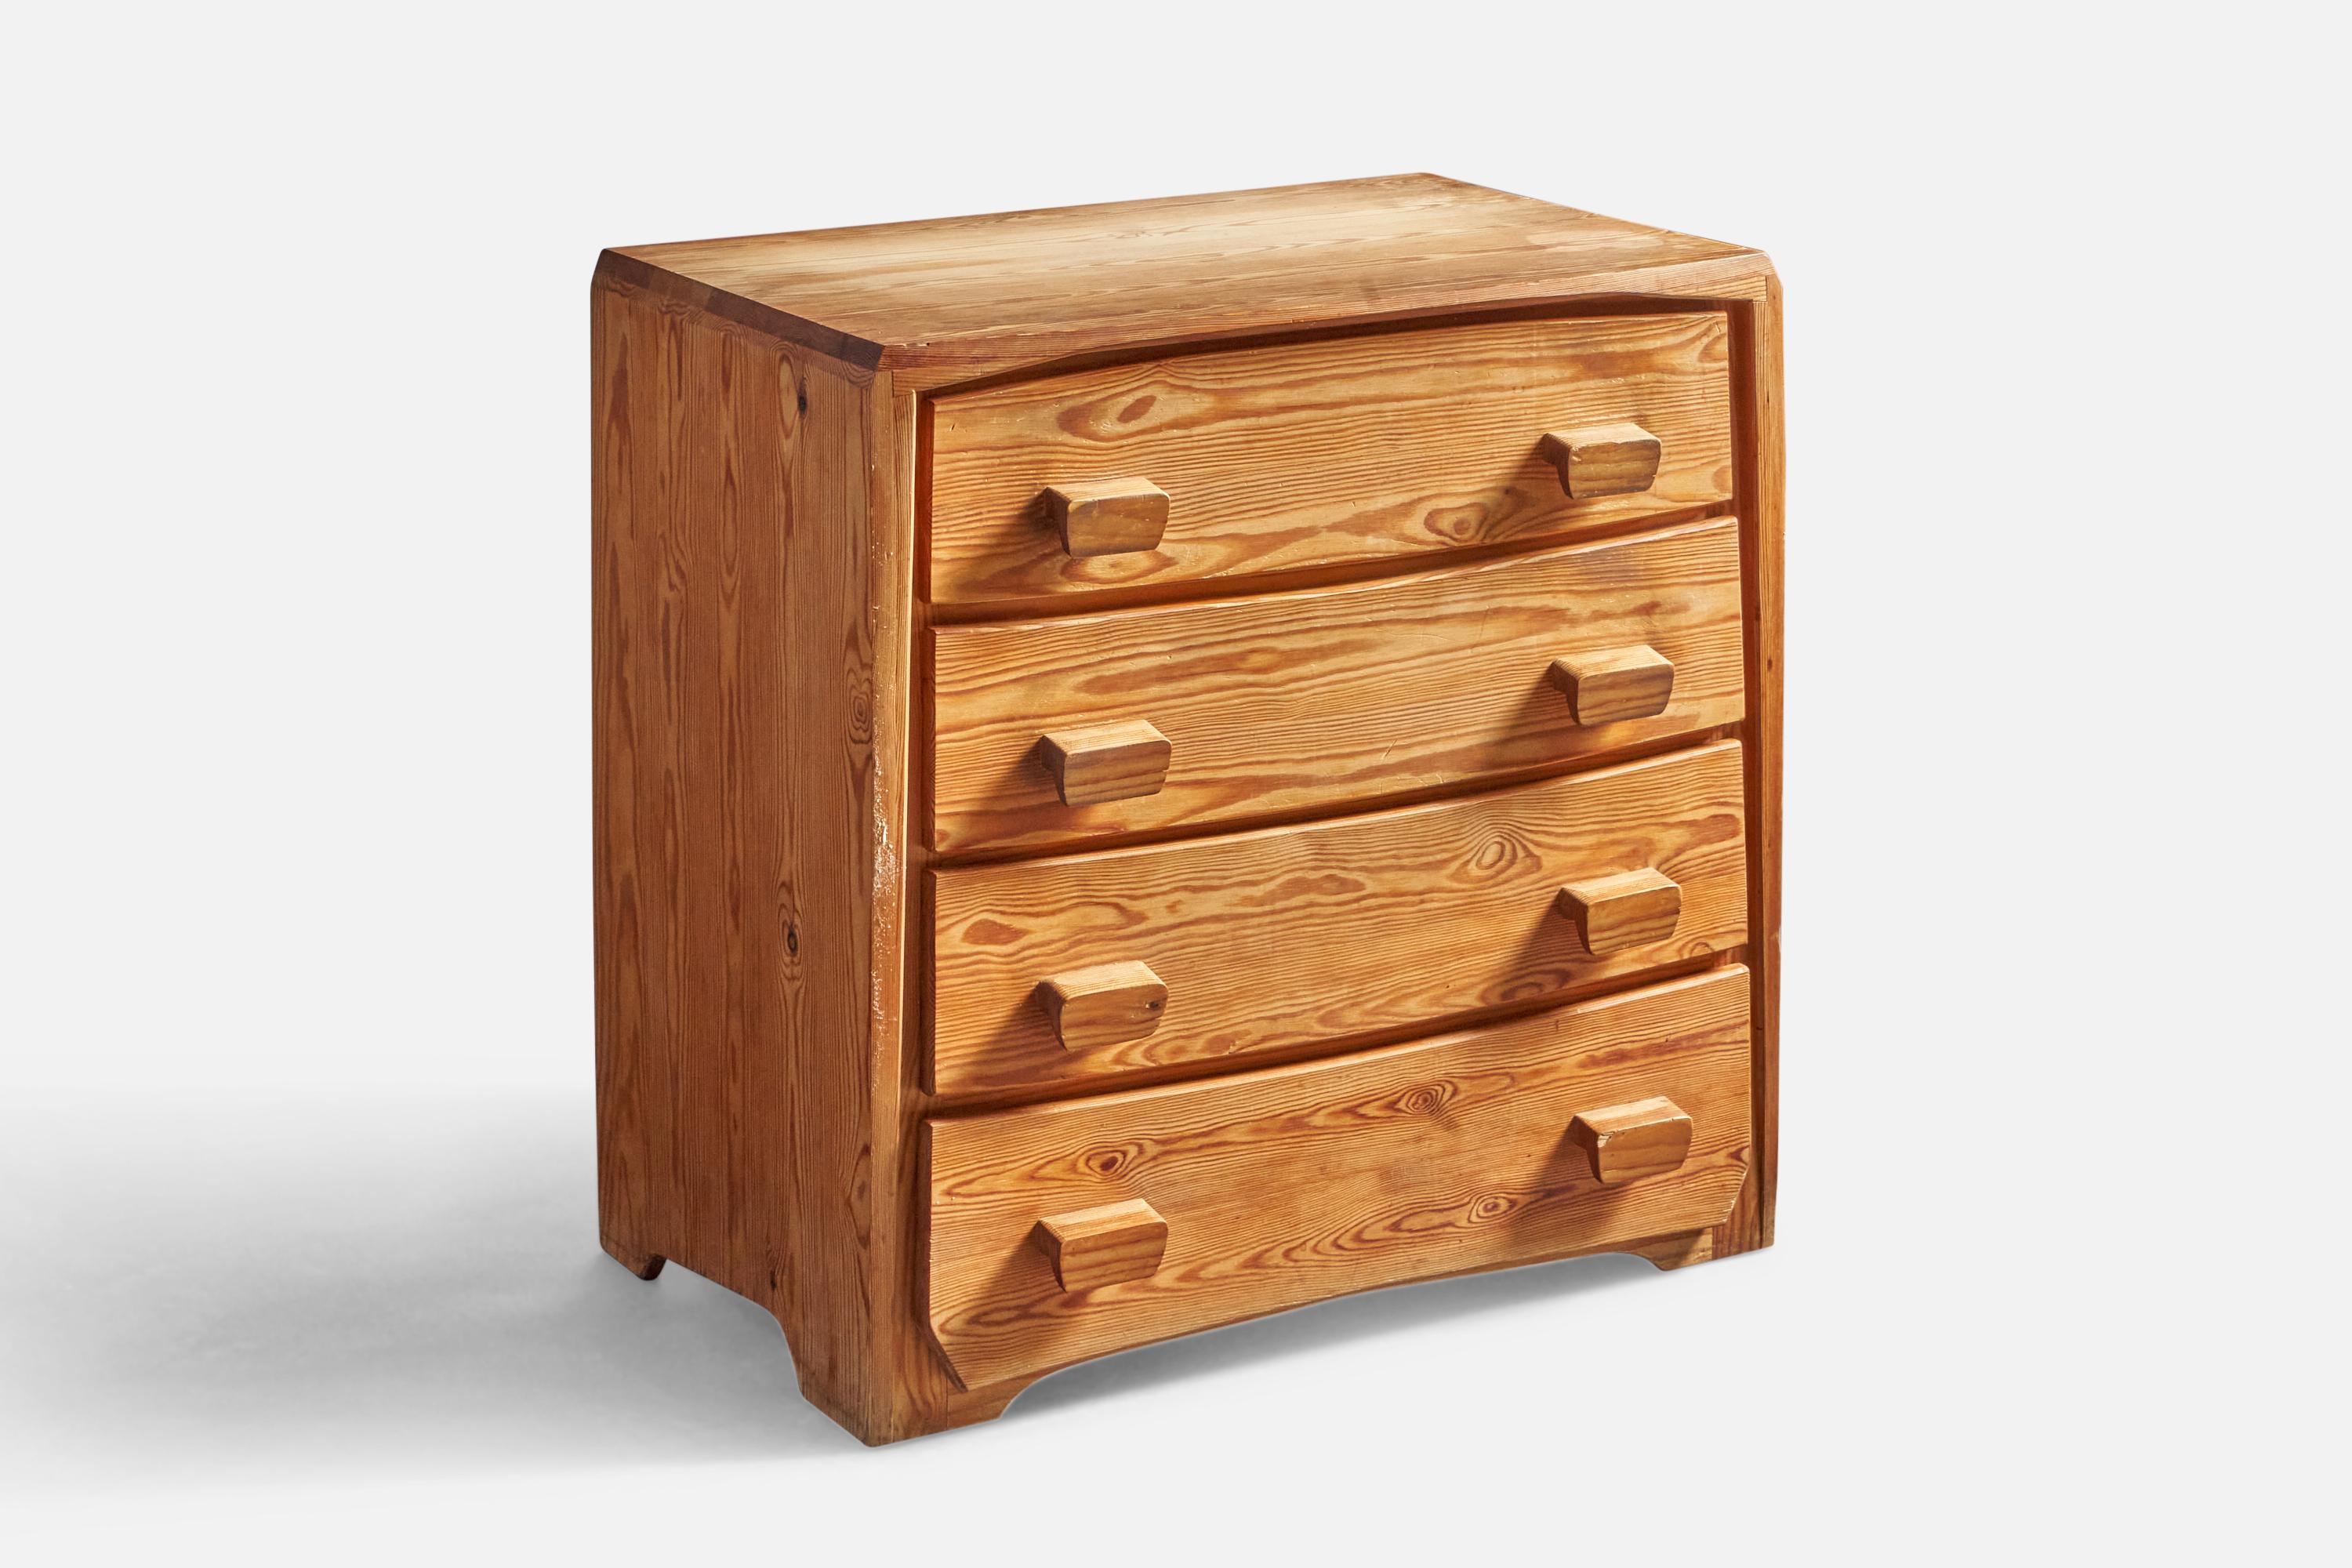 A pine dresser or chest of drawers, designed and produced in Switzerland, c. 1930s.